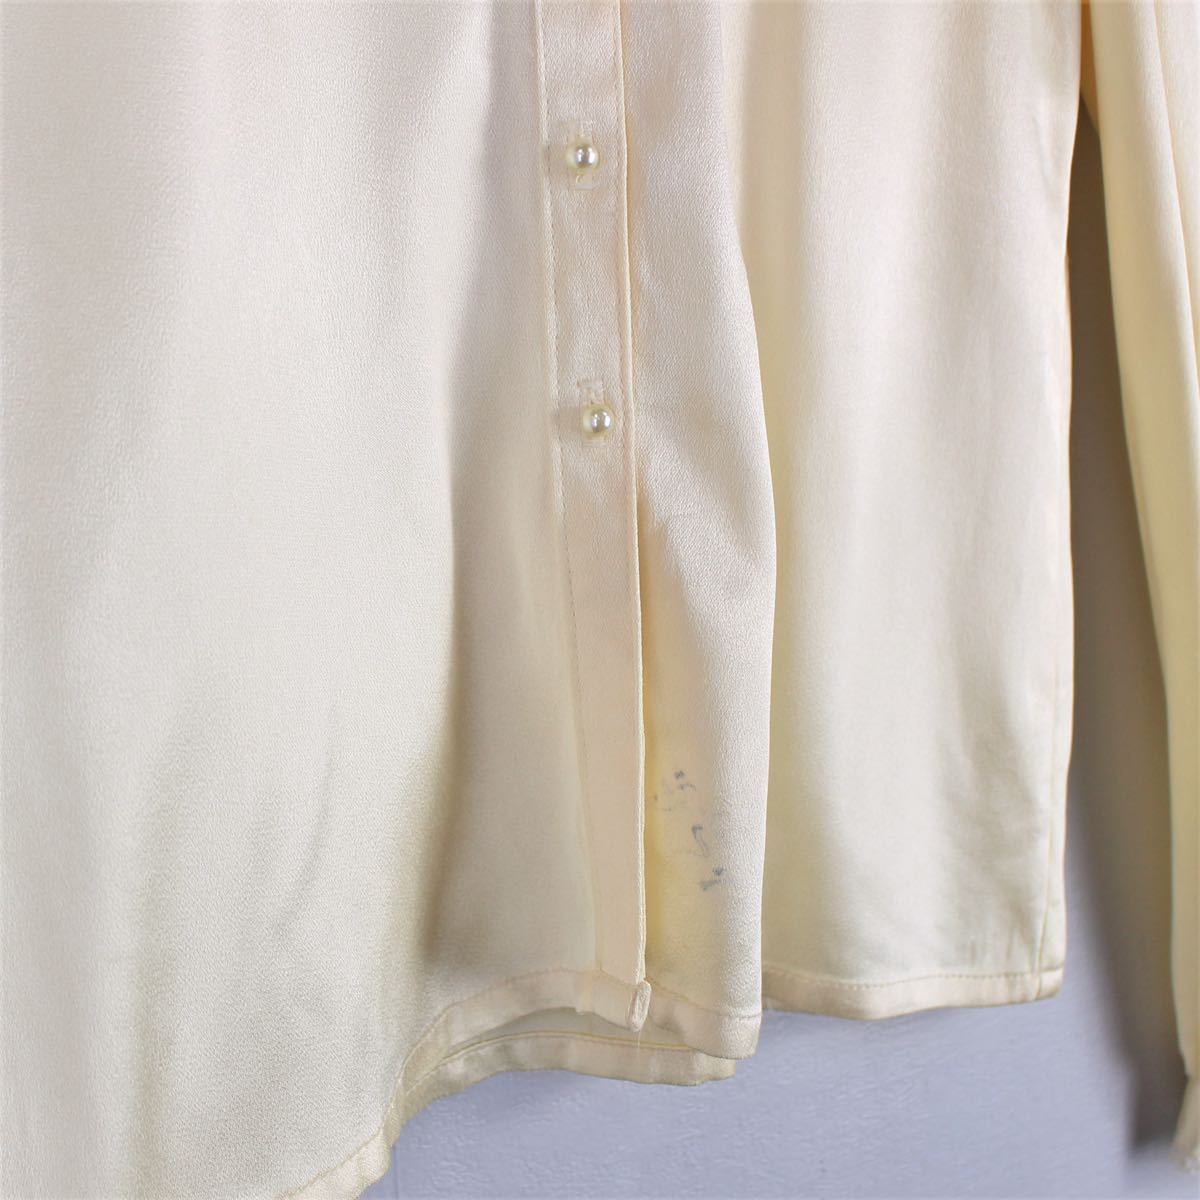 USA VINTAGE GUNNIES GUNNE SAX LACE PEARL BUTTON LACE FRILL BLOUSE/アメリカ古着ガニーズガニーサックスブラウスレースフリルブラウス_画像7